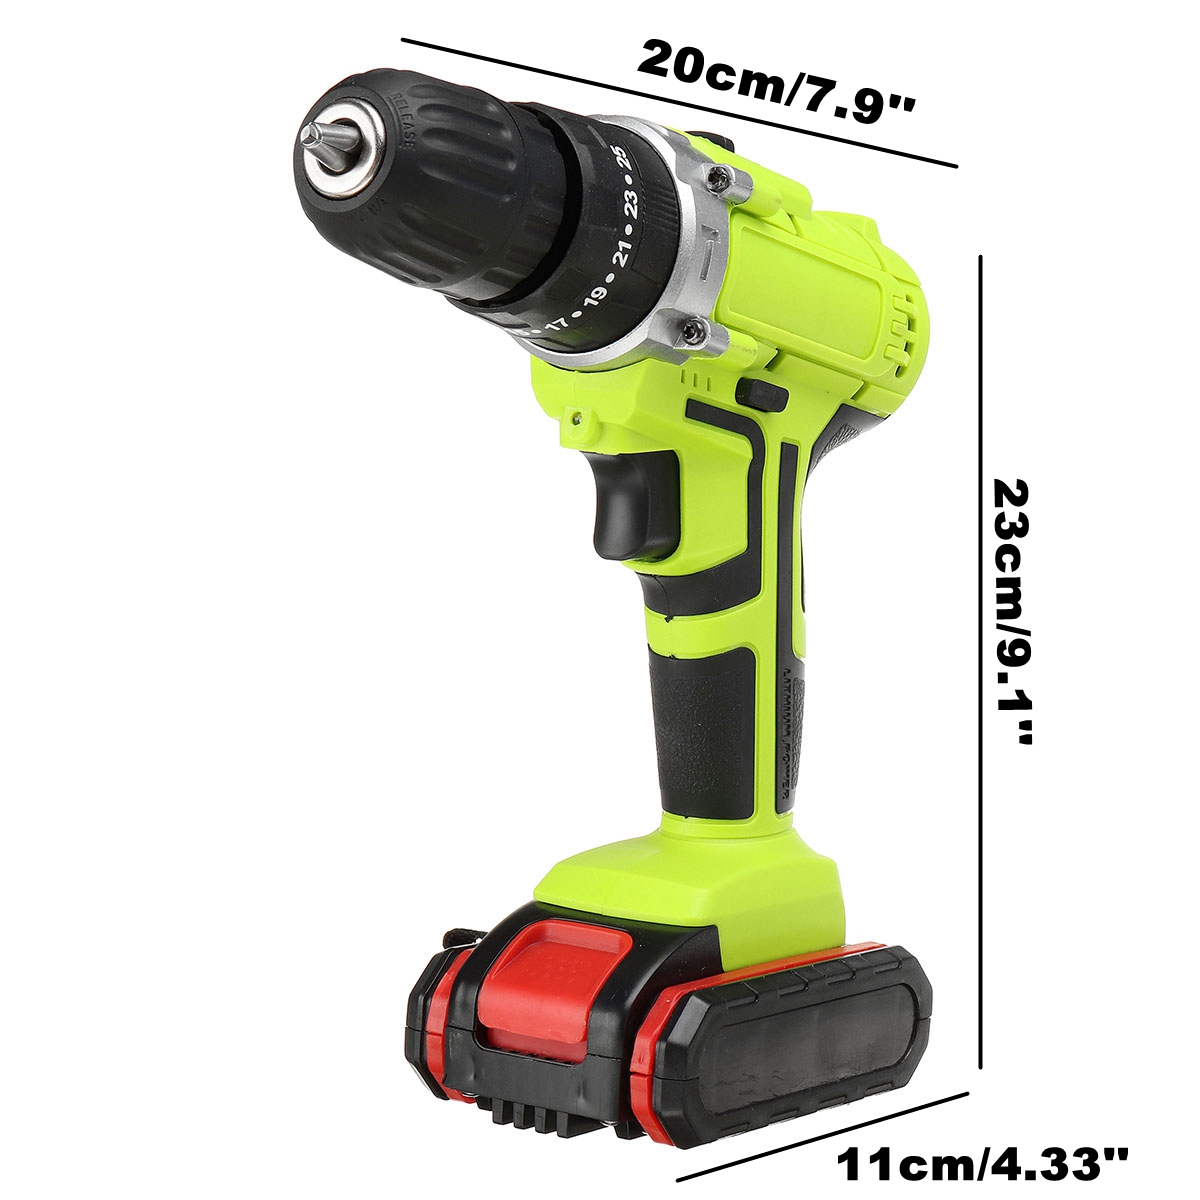 48VF-22800mAh-Cordless-Rechargable-3-In-1-Power-Drills-Impact-Electric-Drill-Driver-With-2Pcs-Batter-1877445-12